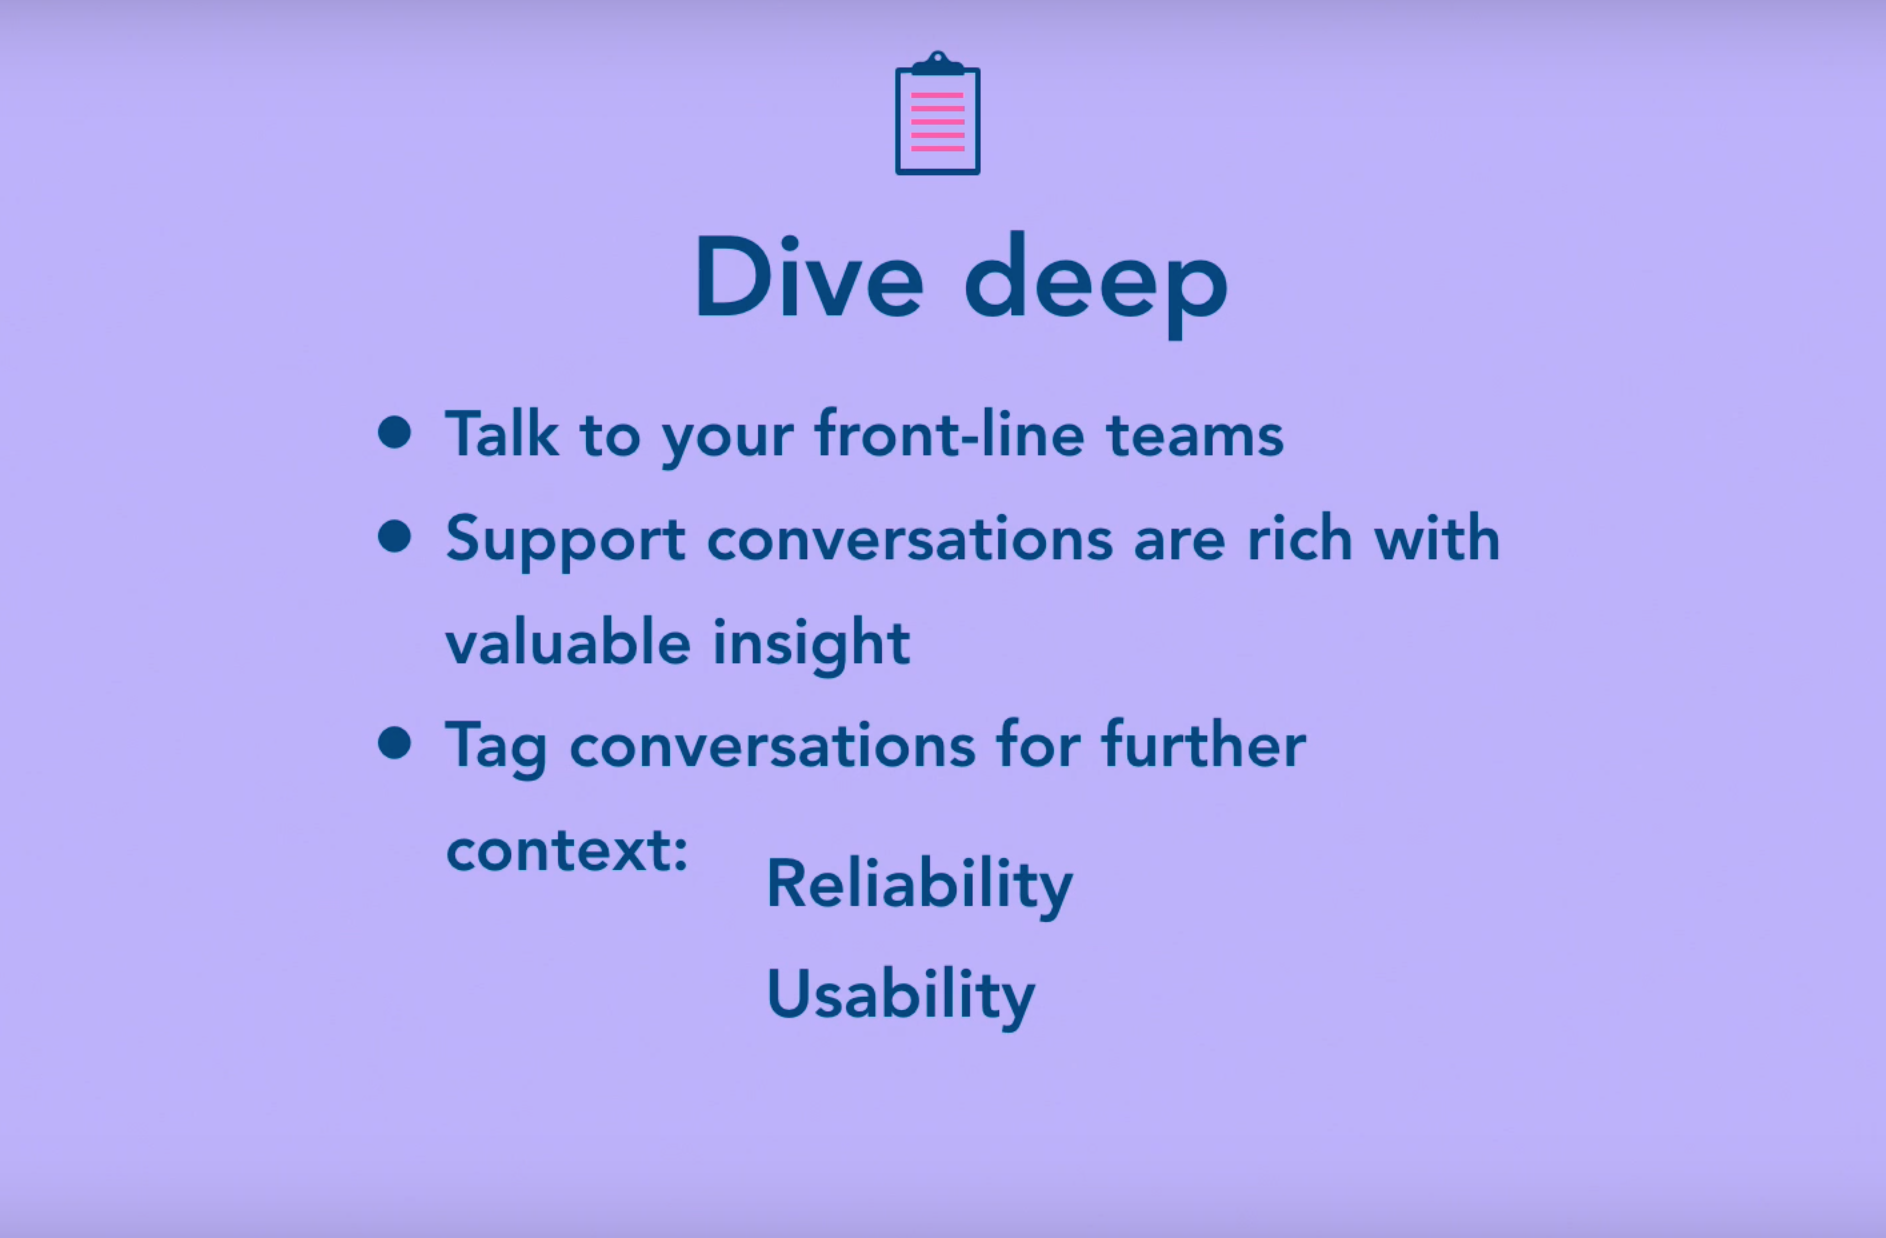 Dive deep and talk to your front-line teams, listen to rich support conversations, and tag them for further context